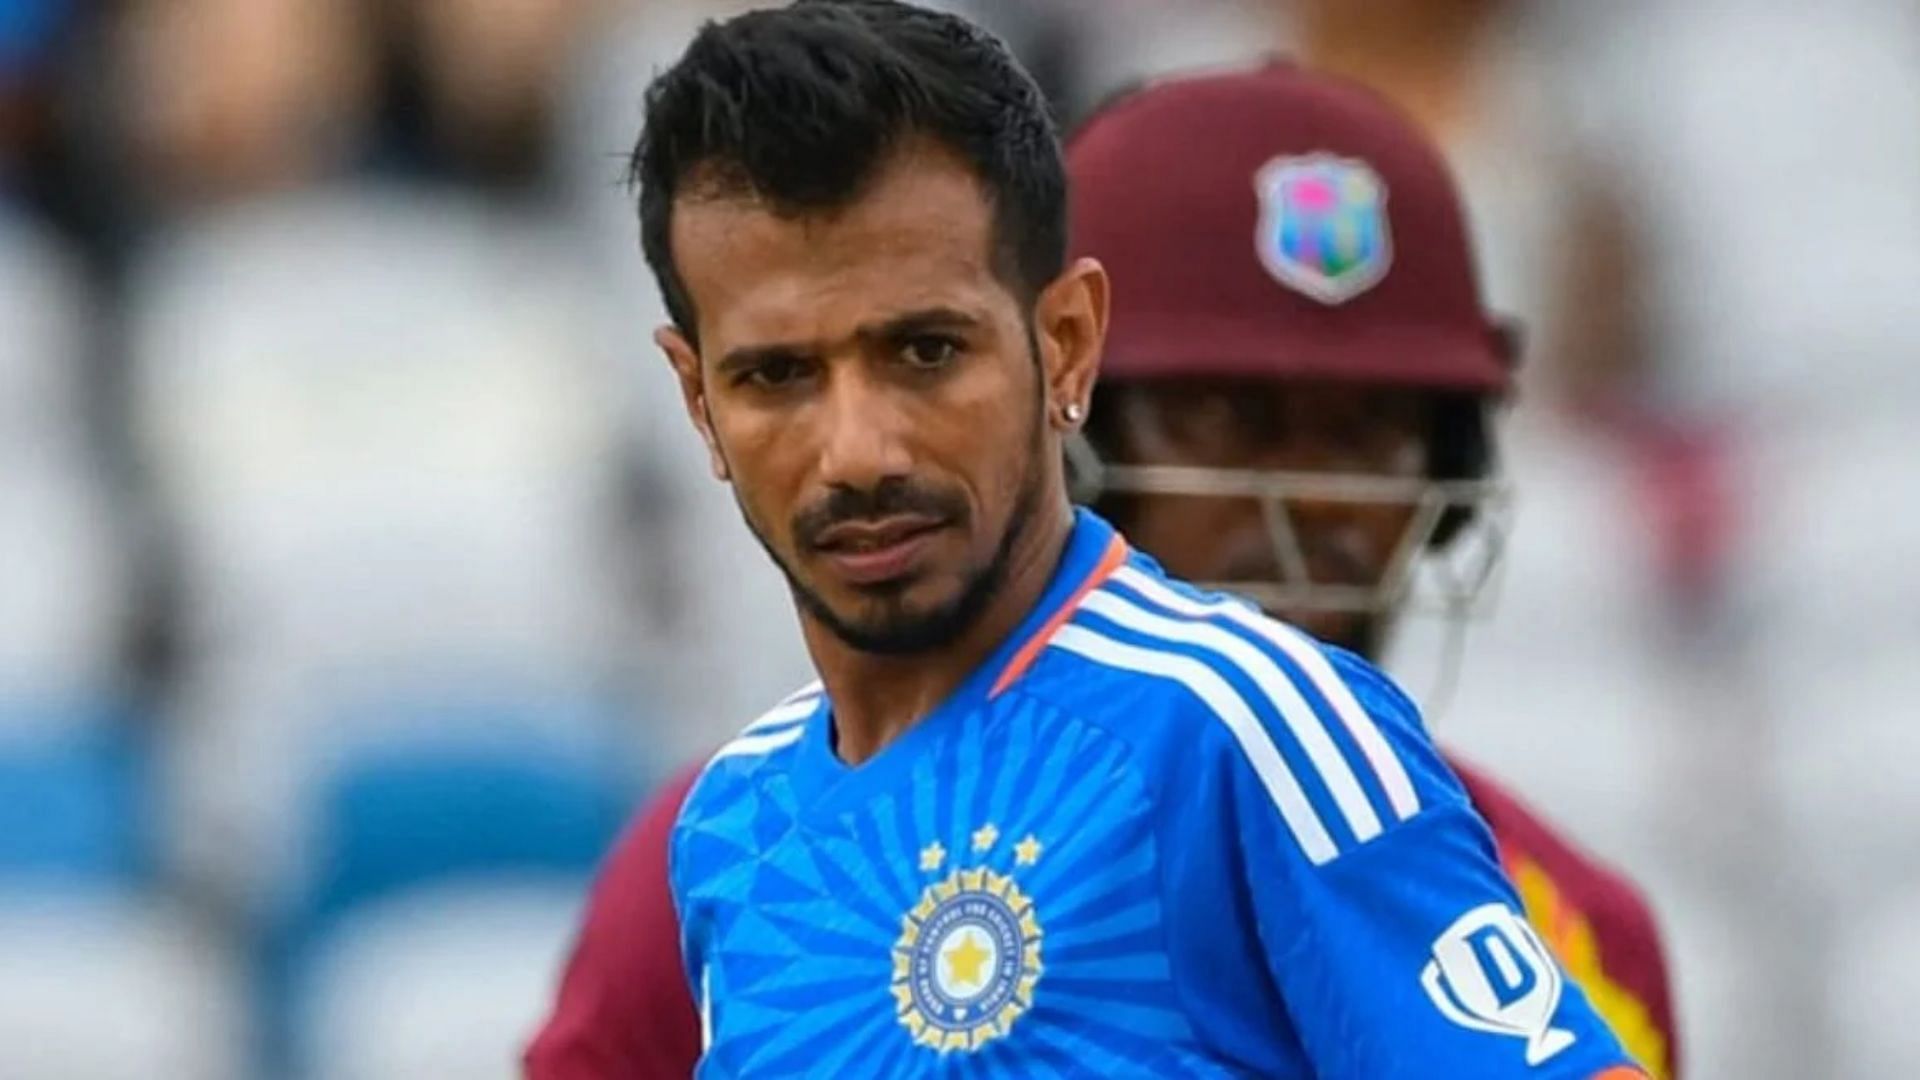 Yuzvendra Chahal is currently playing County cricket for Kent (P.C.:X)